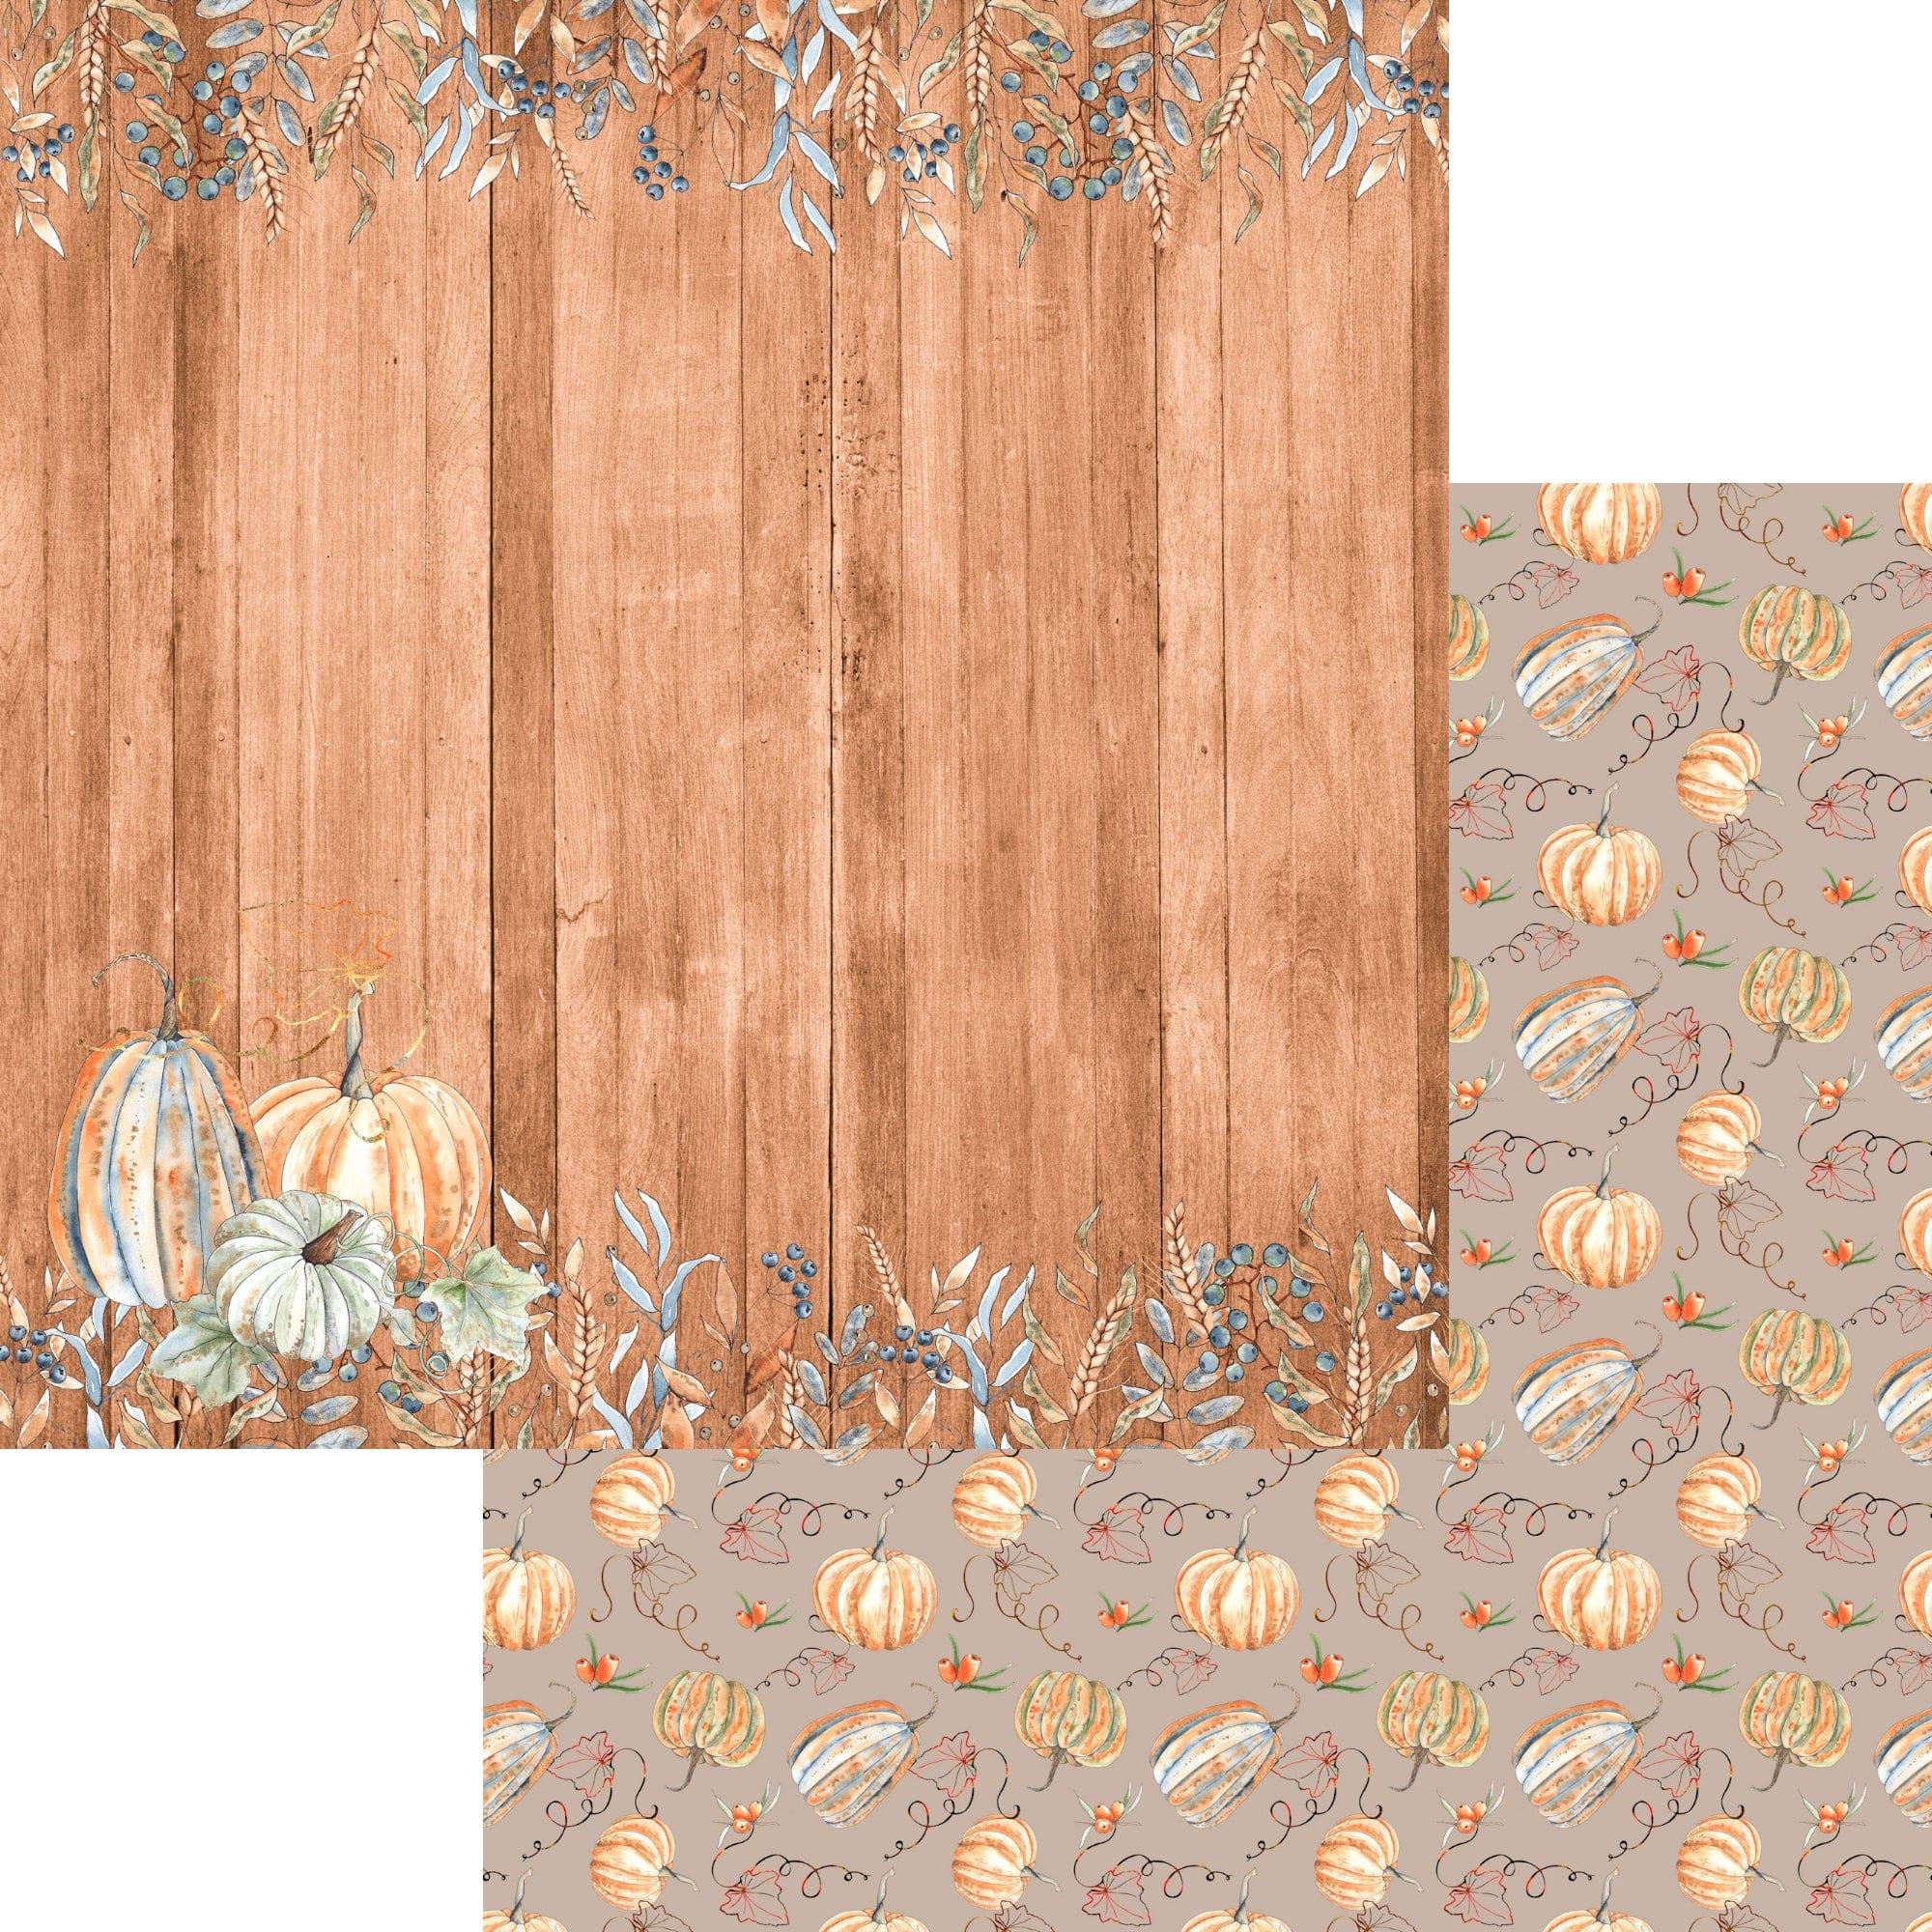 Pumpkin Patch Collection Pretty Pumpkins 12 x 12 Double-Sided Scrapbook Paper by SSC Designs - Scrapbook Supply Companies